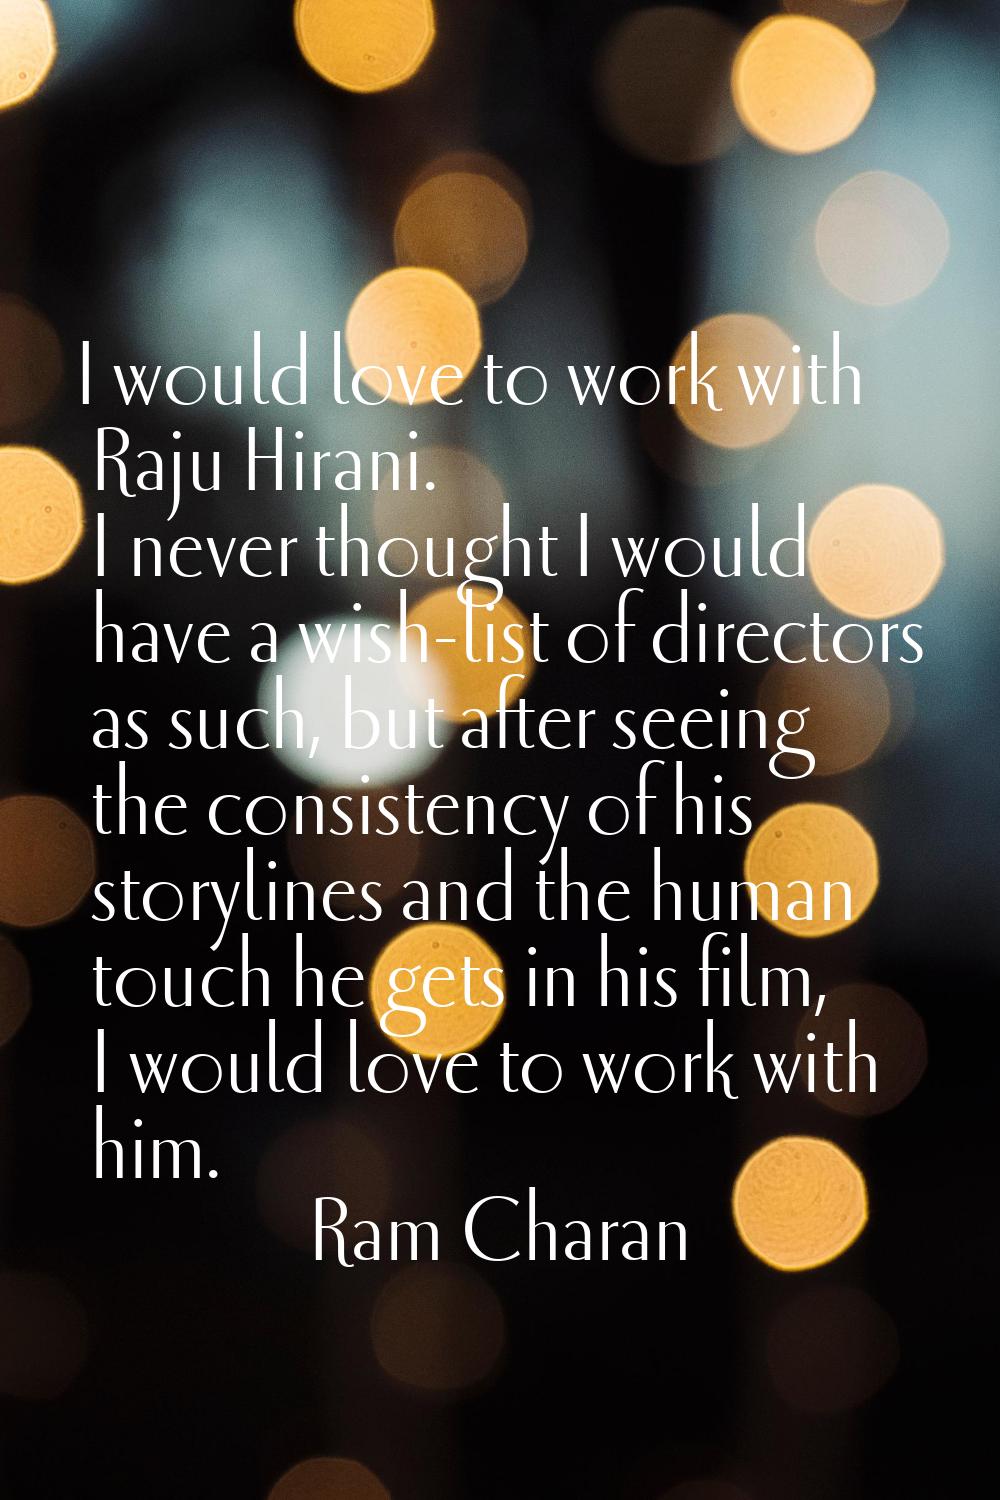 I would love to work with Raju Hirani. I never thought I would have a wish-list of directors as suc